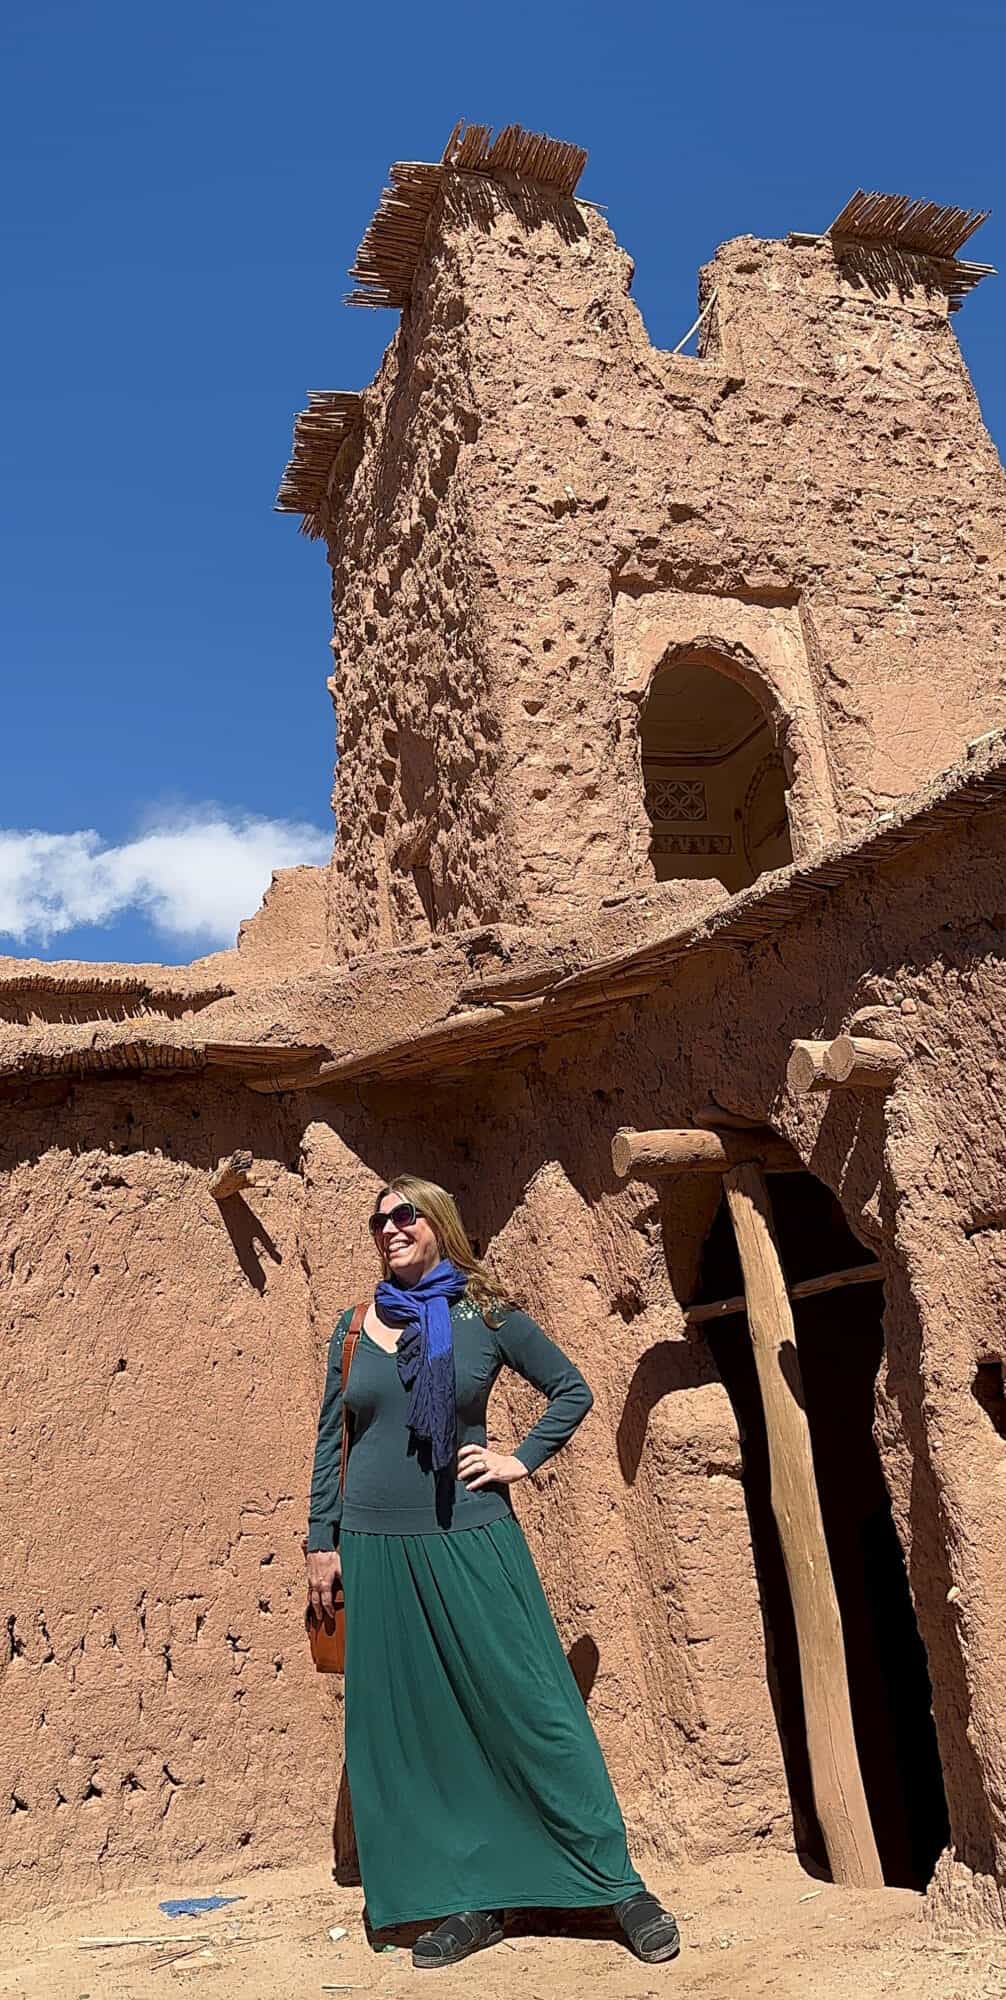 Abigail King standing within UNESCO World Heritage Site Ait Benhaddou as part of a Morocco itinerary